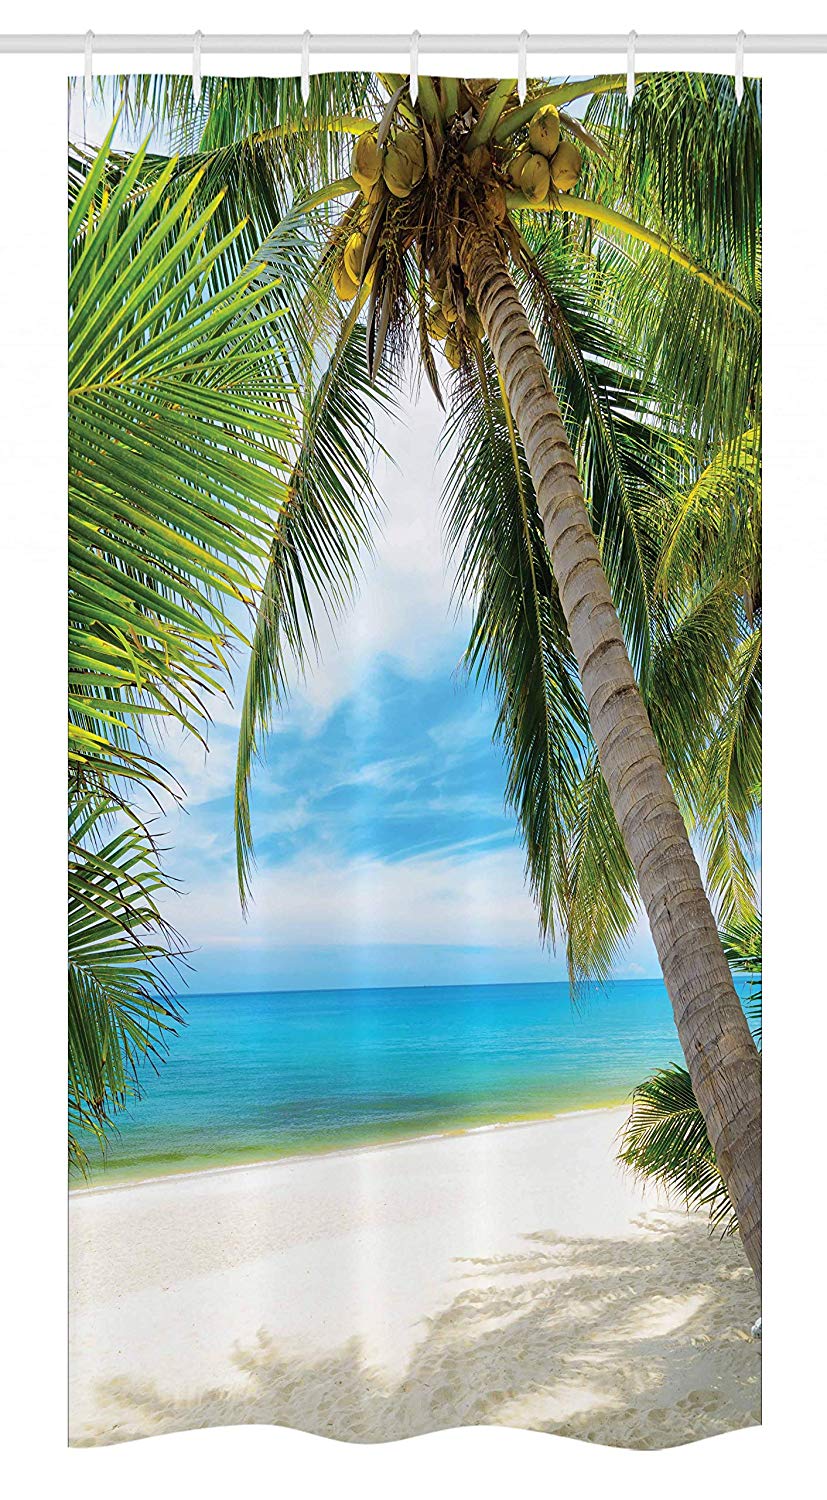 Ambesonne Ocean Stall Shower Curtain, Shadow Shade of a Coconut Palm Tree on White Sandy Seashore Image, Fabric Bathroom Decor Set with Hooks, 36